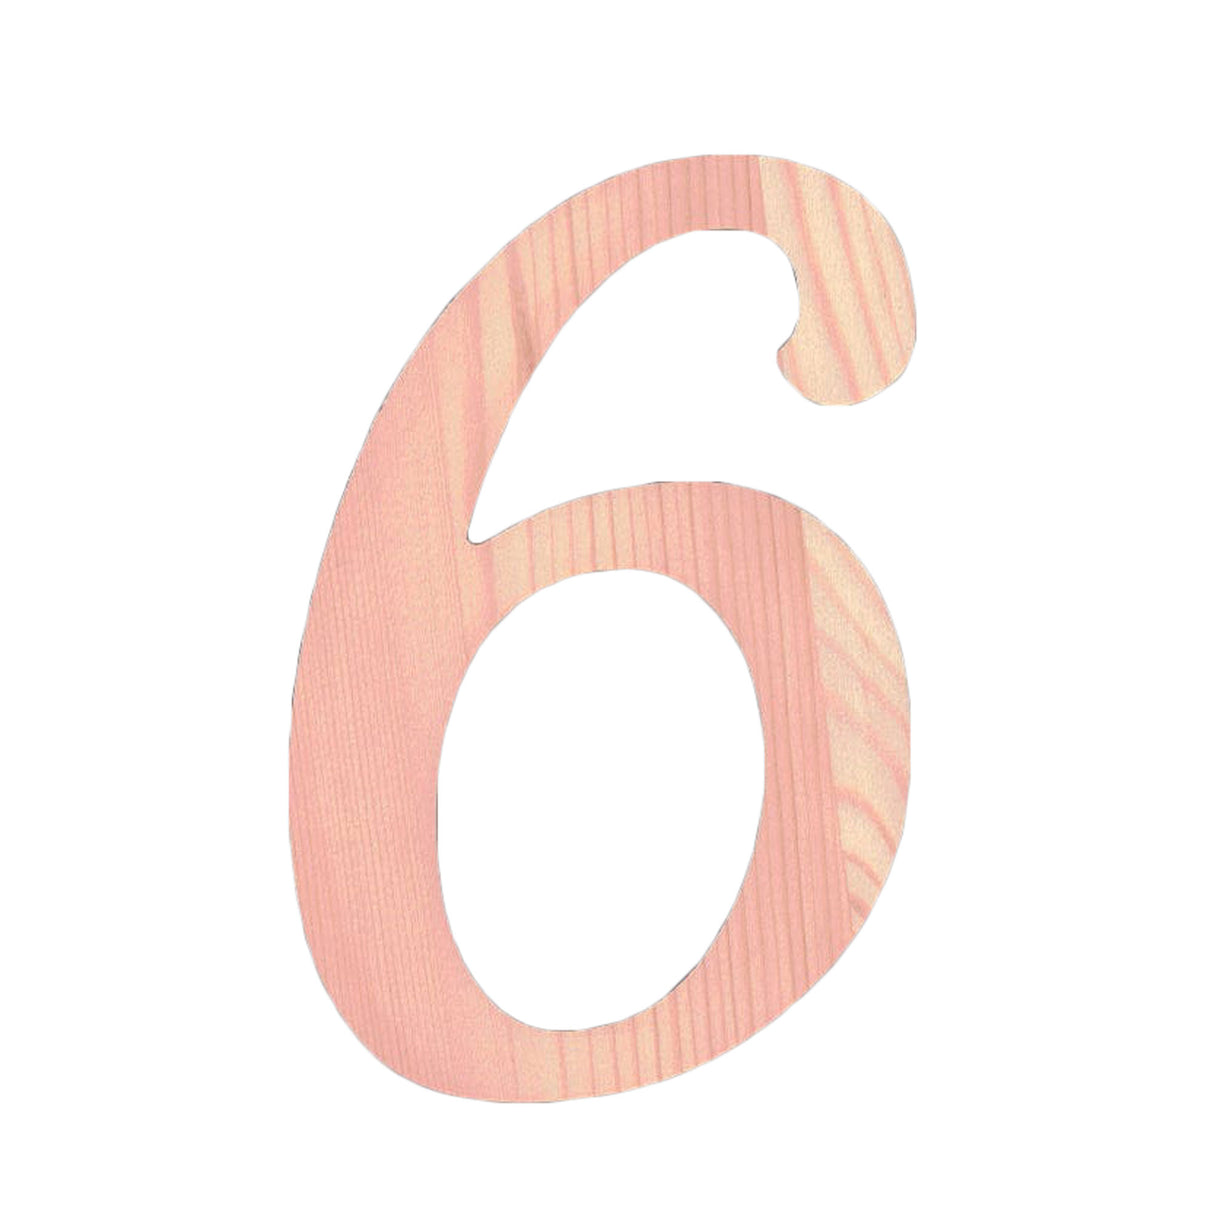 Unfinished Wooden Playball Italic Number 6 (6.25 Inches) in Beige color,  shape